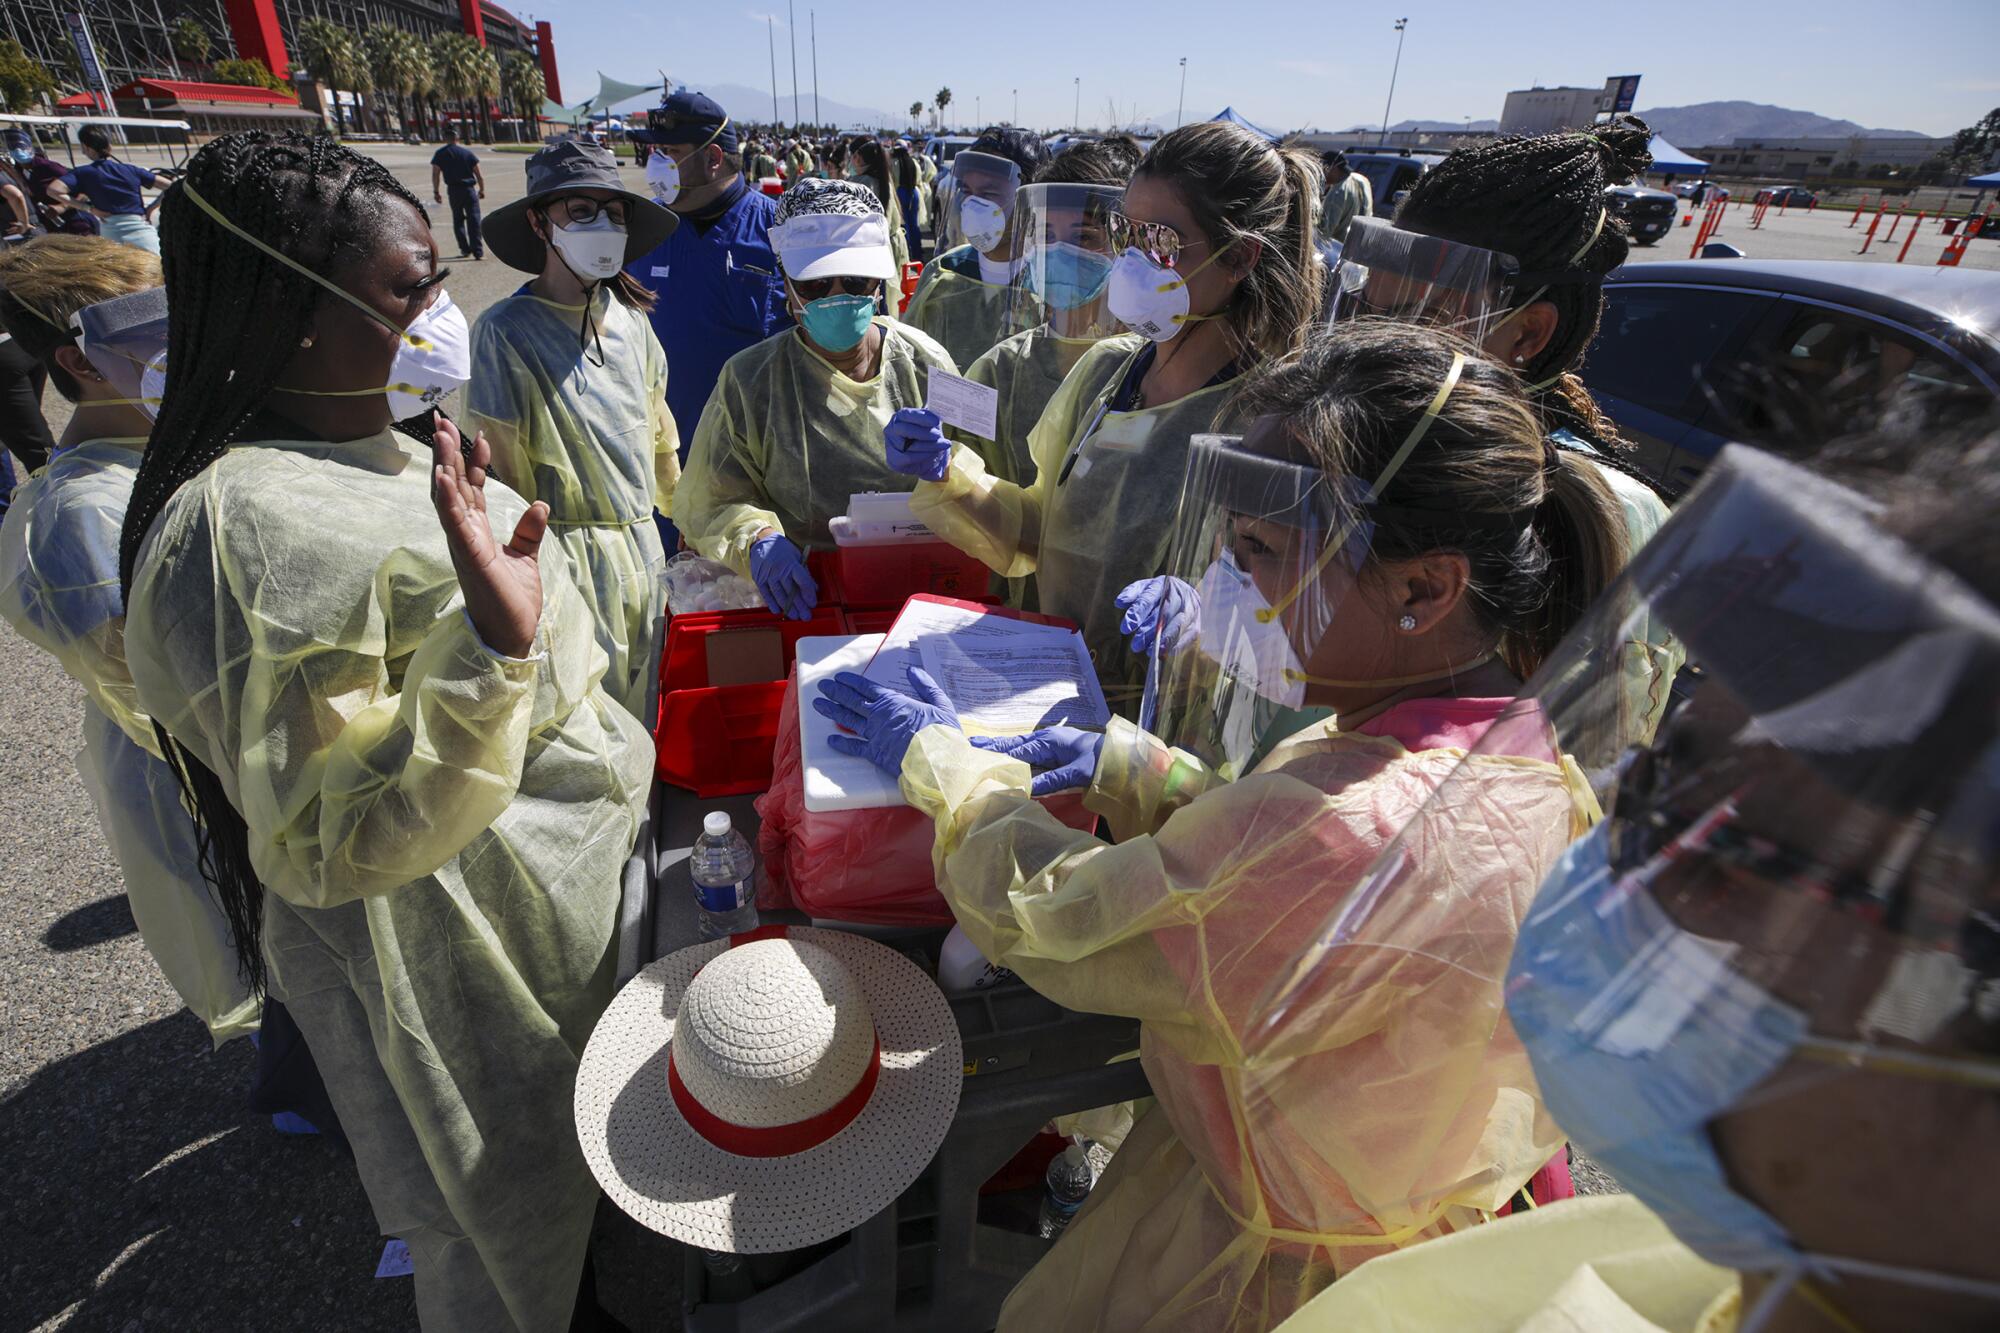 Out of state nurse Leshea Moore, left, helps nurses working first time at a mass vaccination site in Fontana.